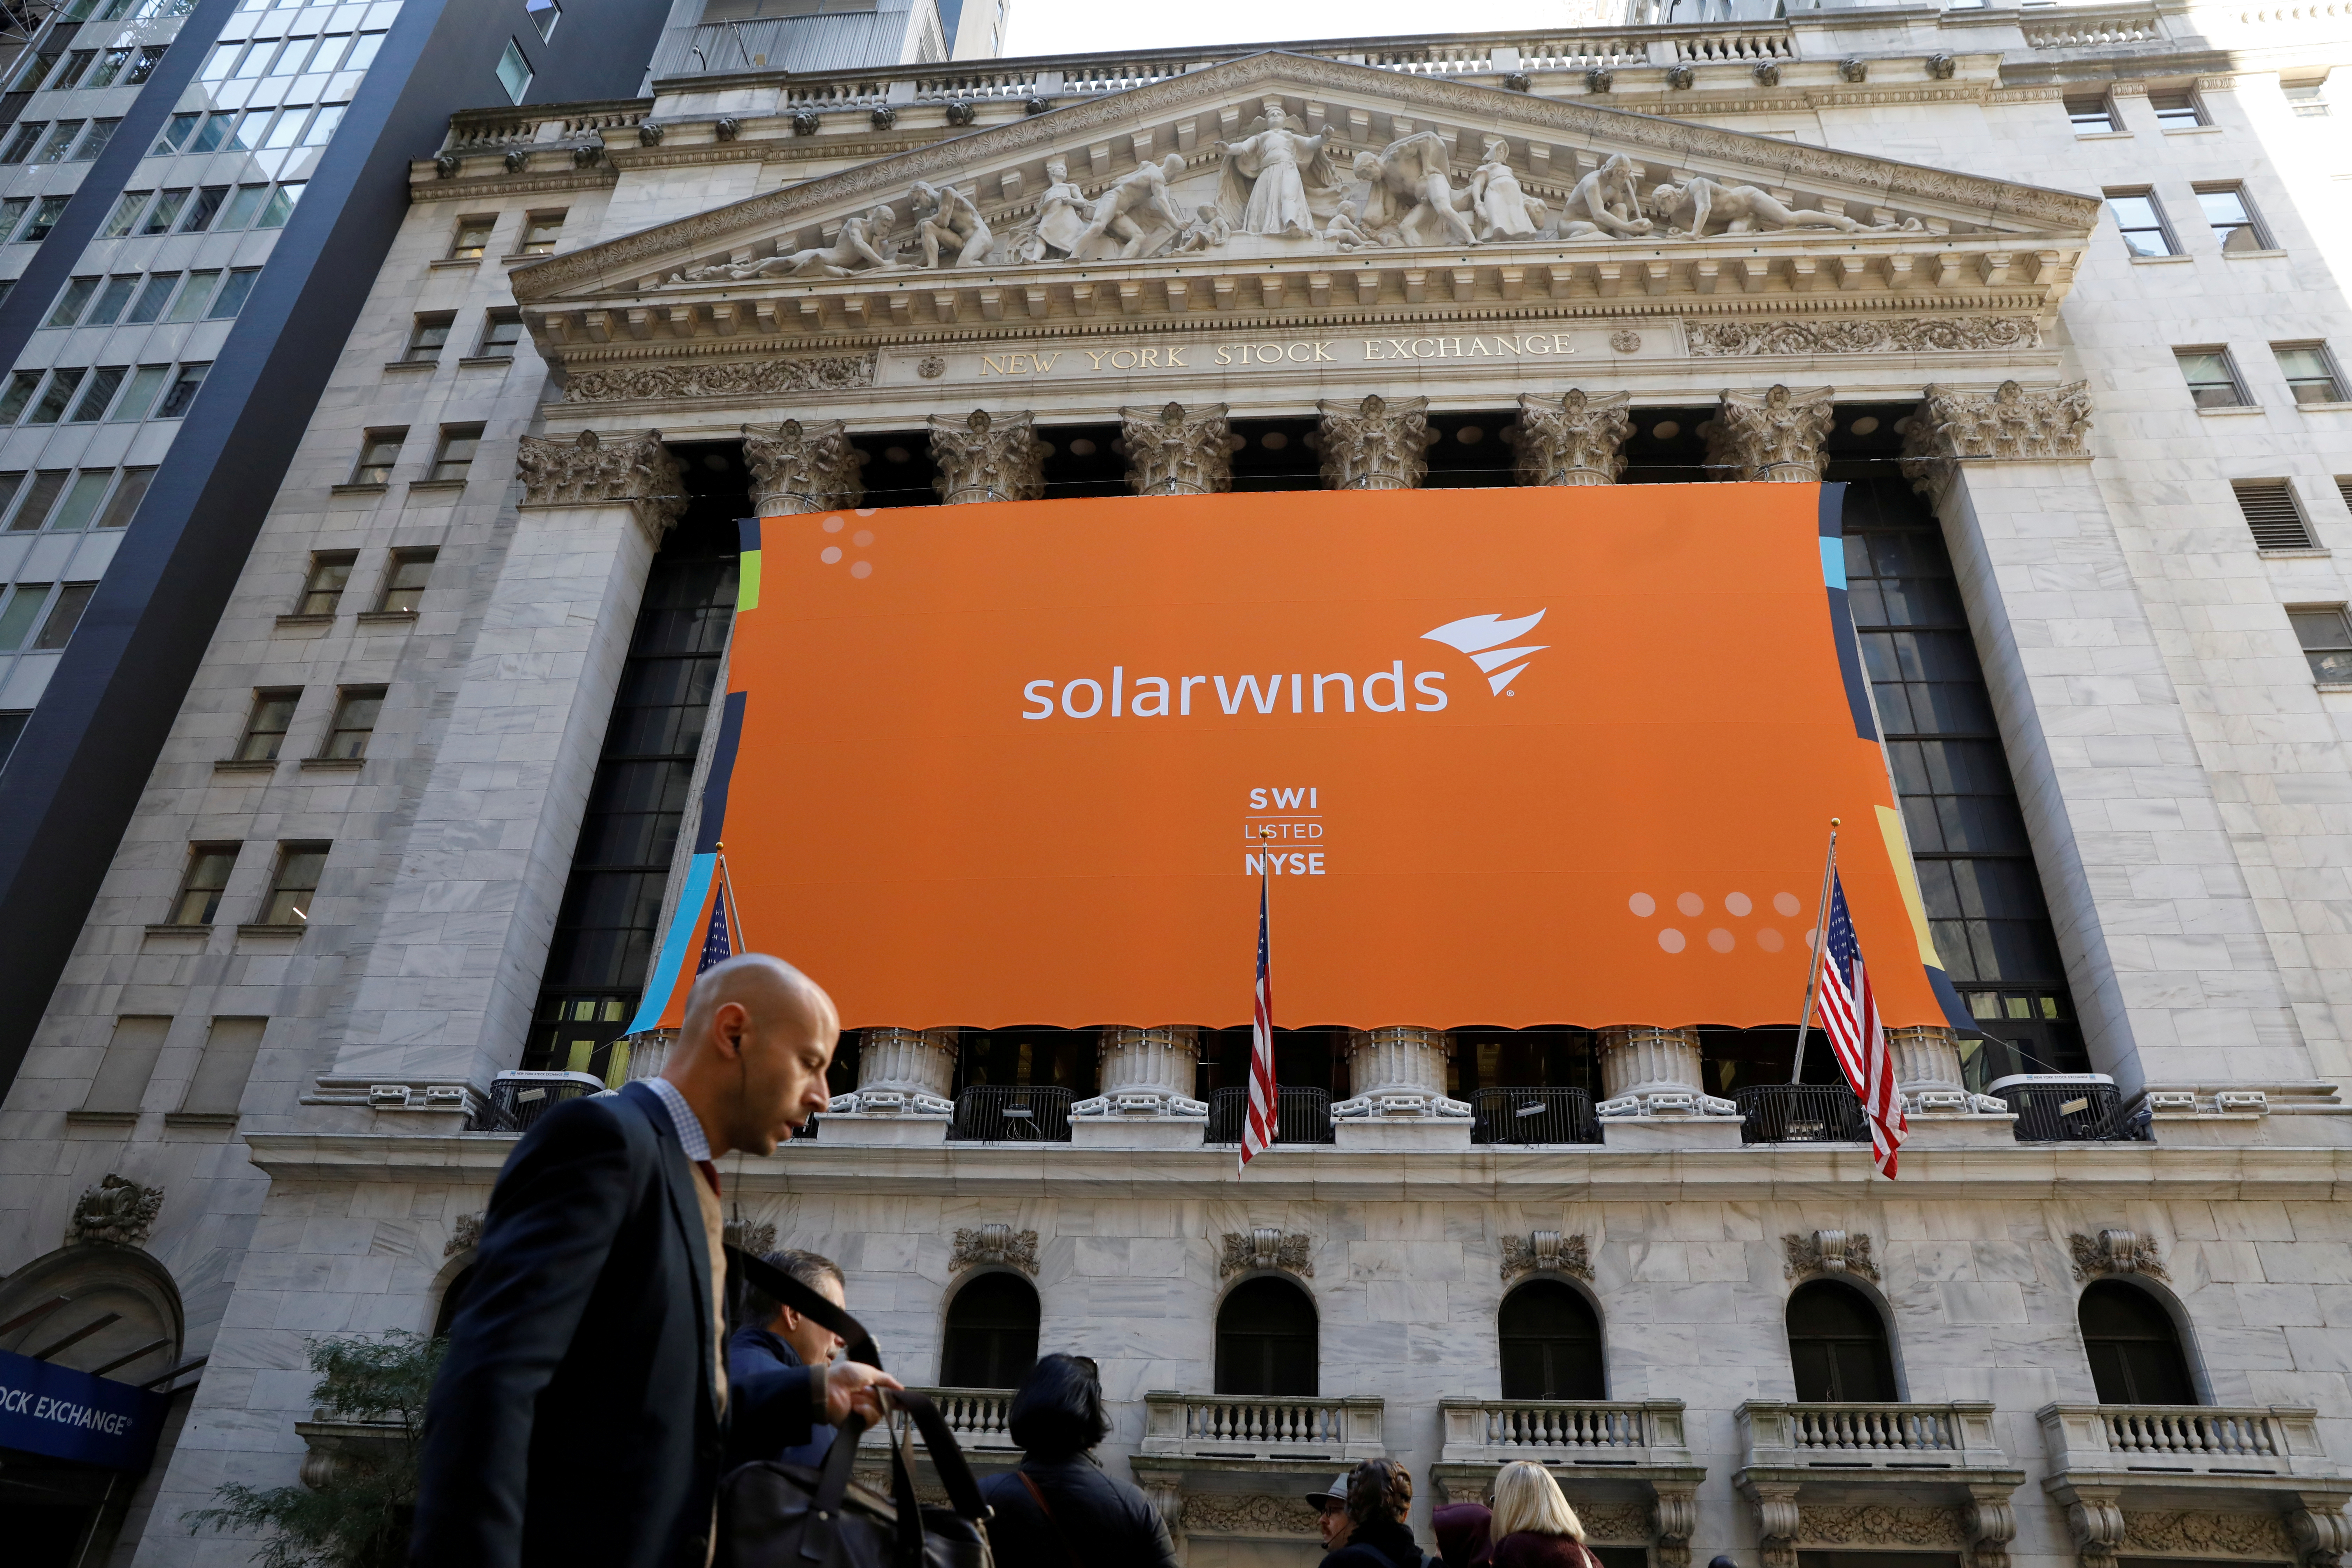 SolarWinds Corp. banner hangs at the New York Stock Exchange (NYSE) on the IPO day of the company in New York, U.S., October 19, 2018. REUTERS/Brendan McDermid